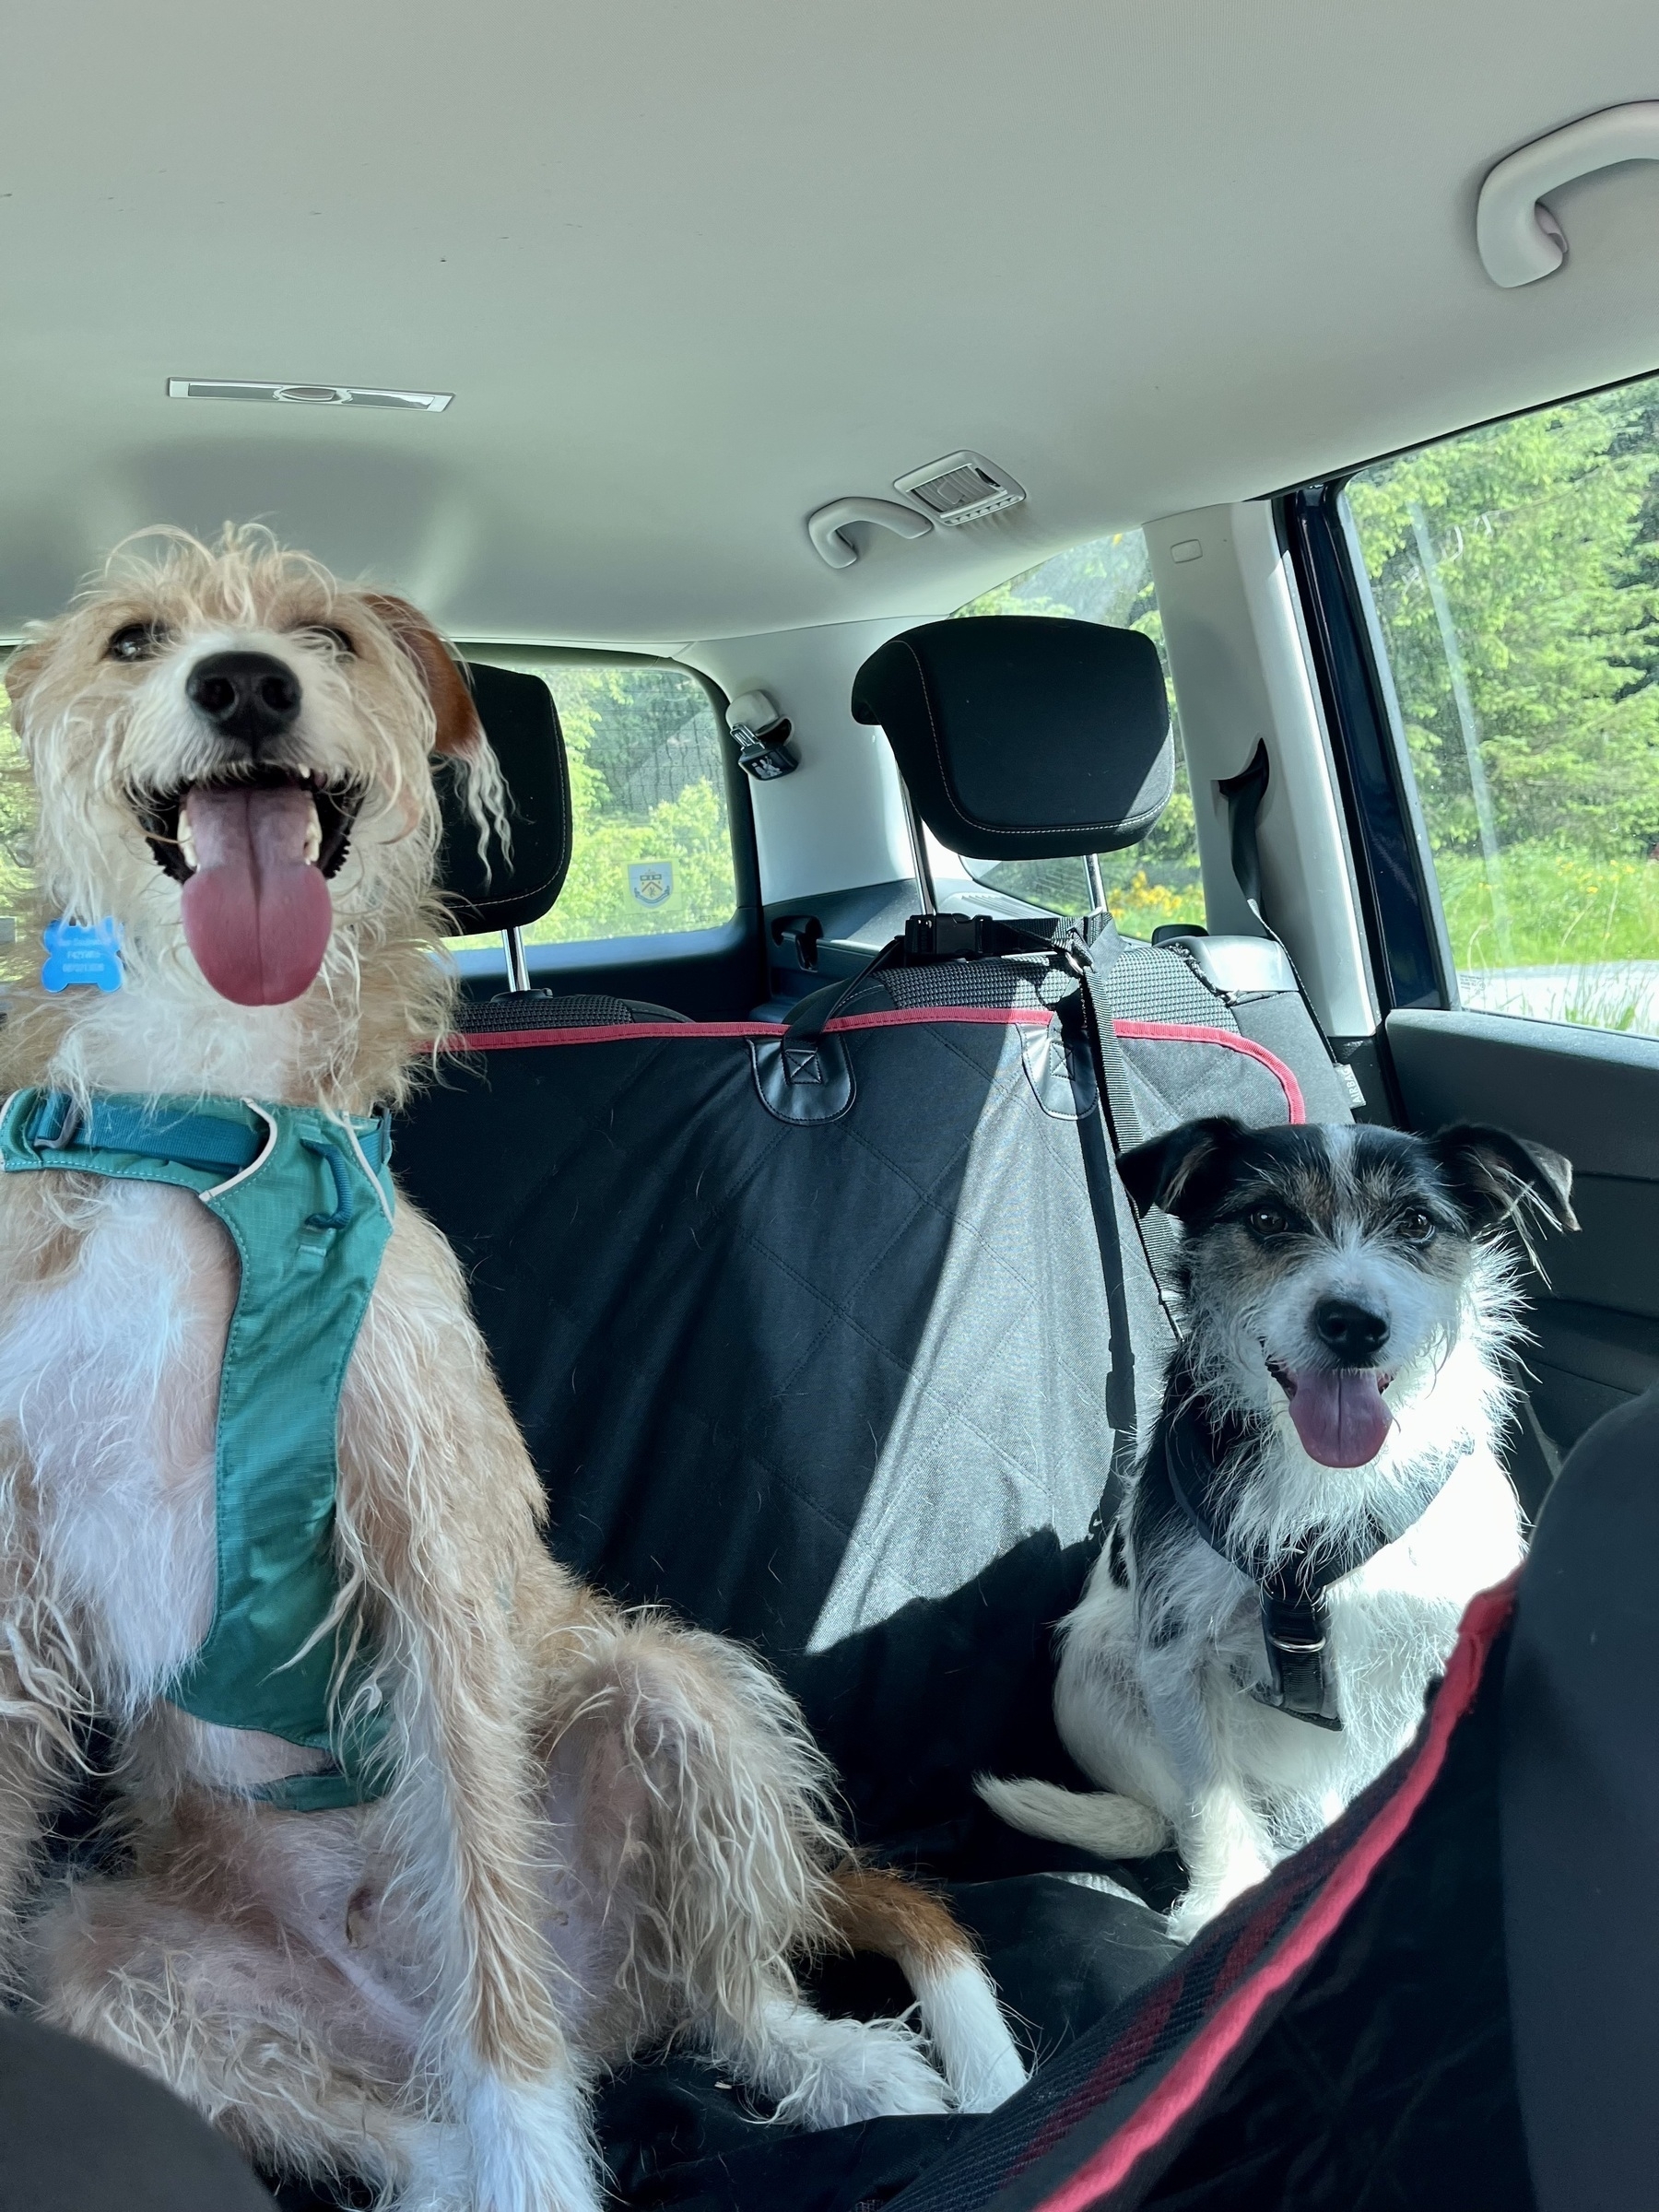 Shane the hairy and lurcher and Leela the terrier sit, panting and smiling, in the back of a car after their walk. 